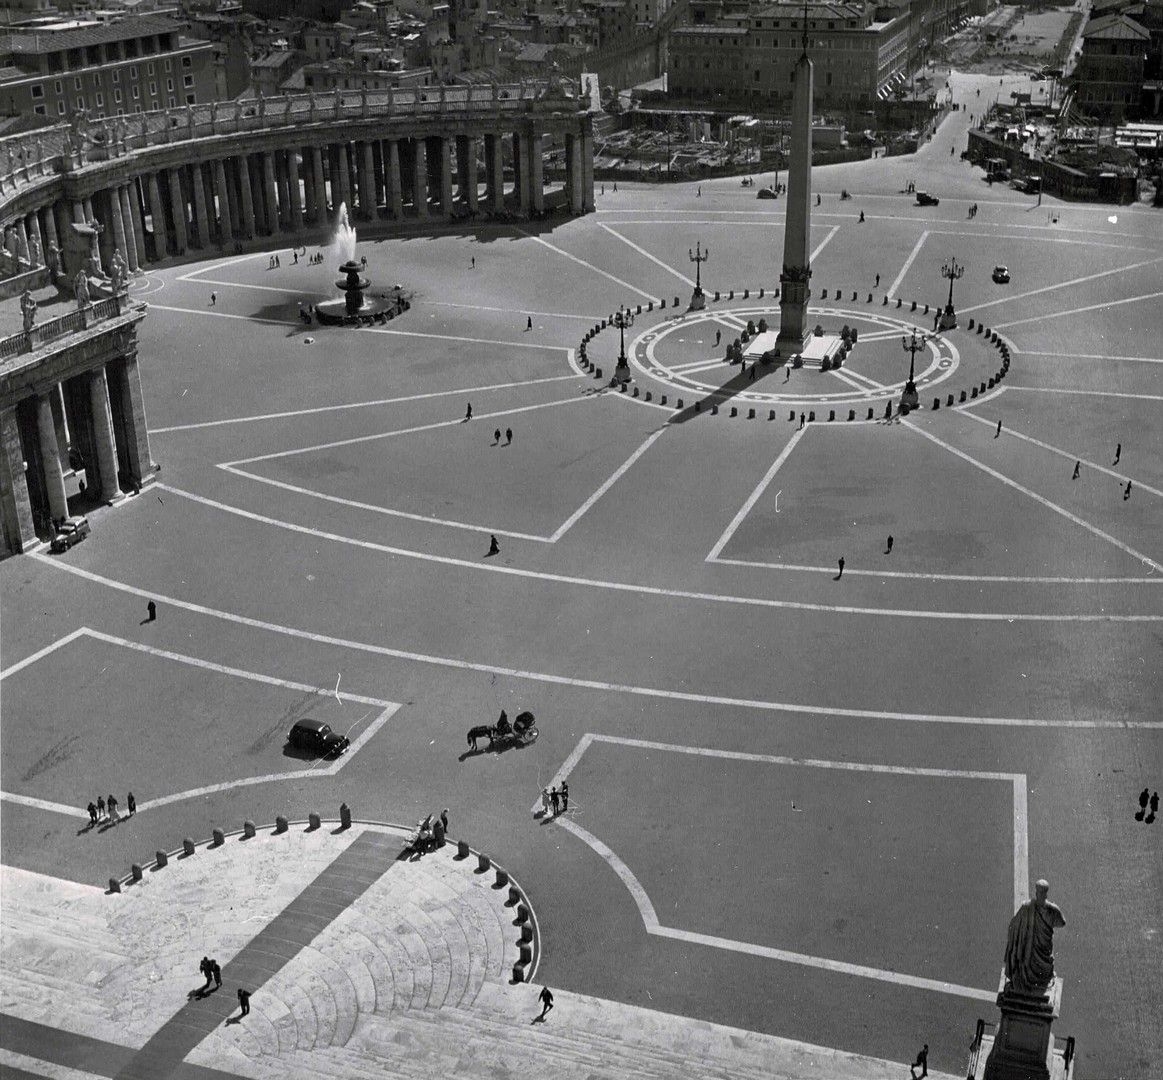 St. Peter's Square, Rome by Herbert List, ca. 1951